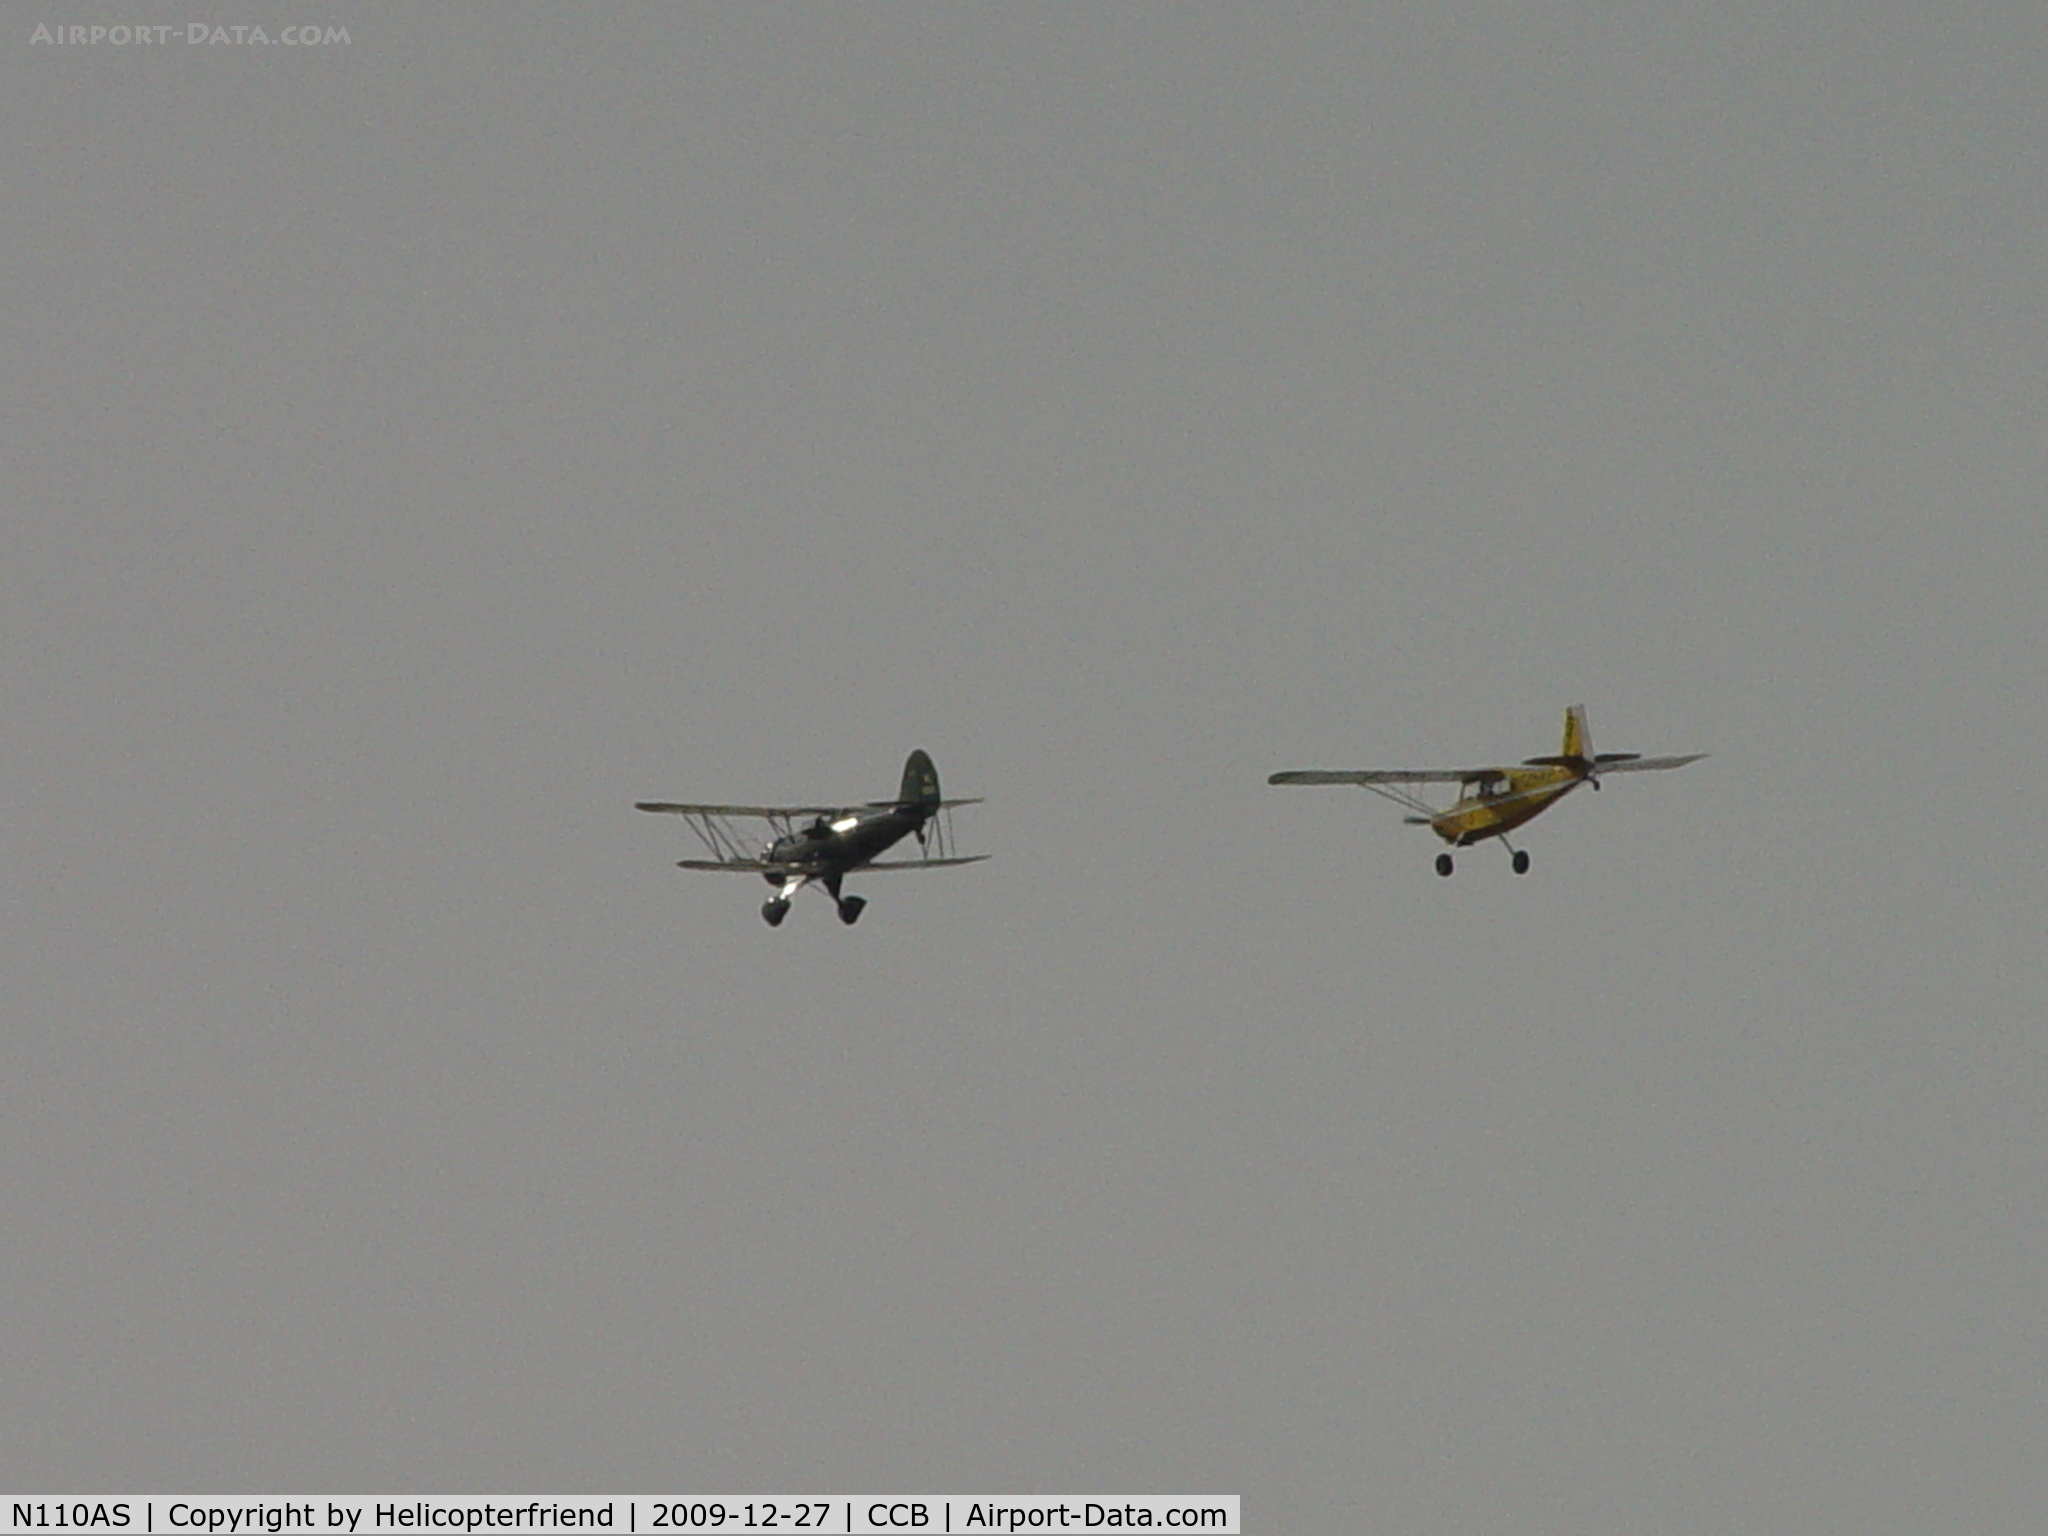 N110AS, 2005 Waco YMF-F5C C/N F5C110, Waco on the left making a formation pass with a Bellanca Scout N625AP